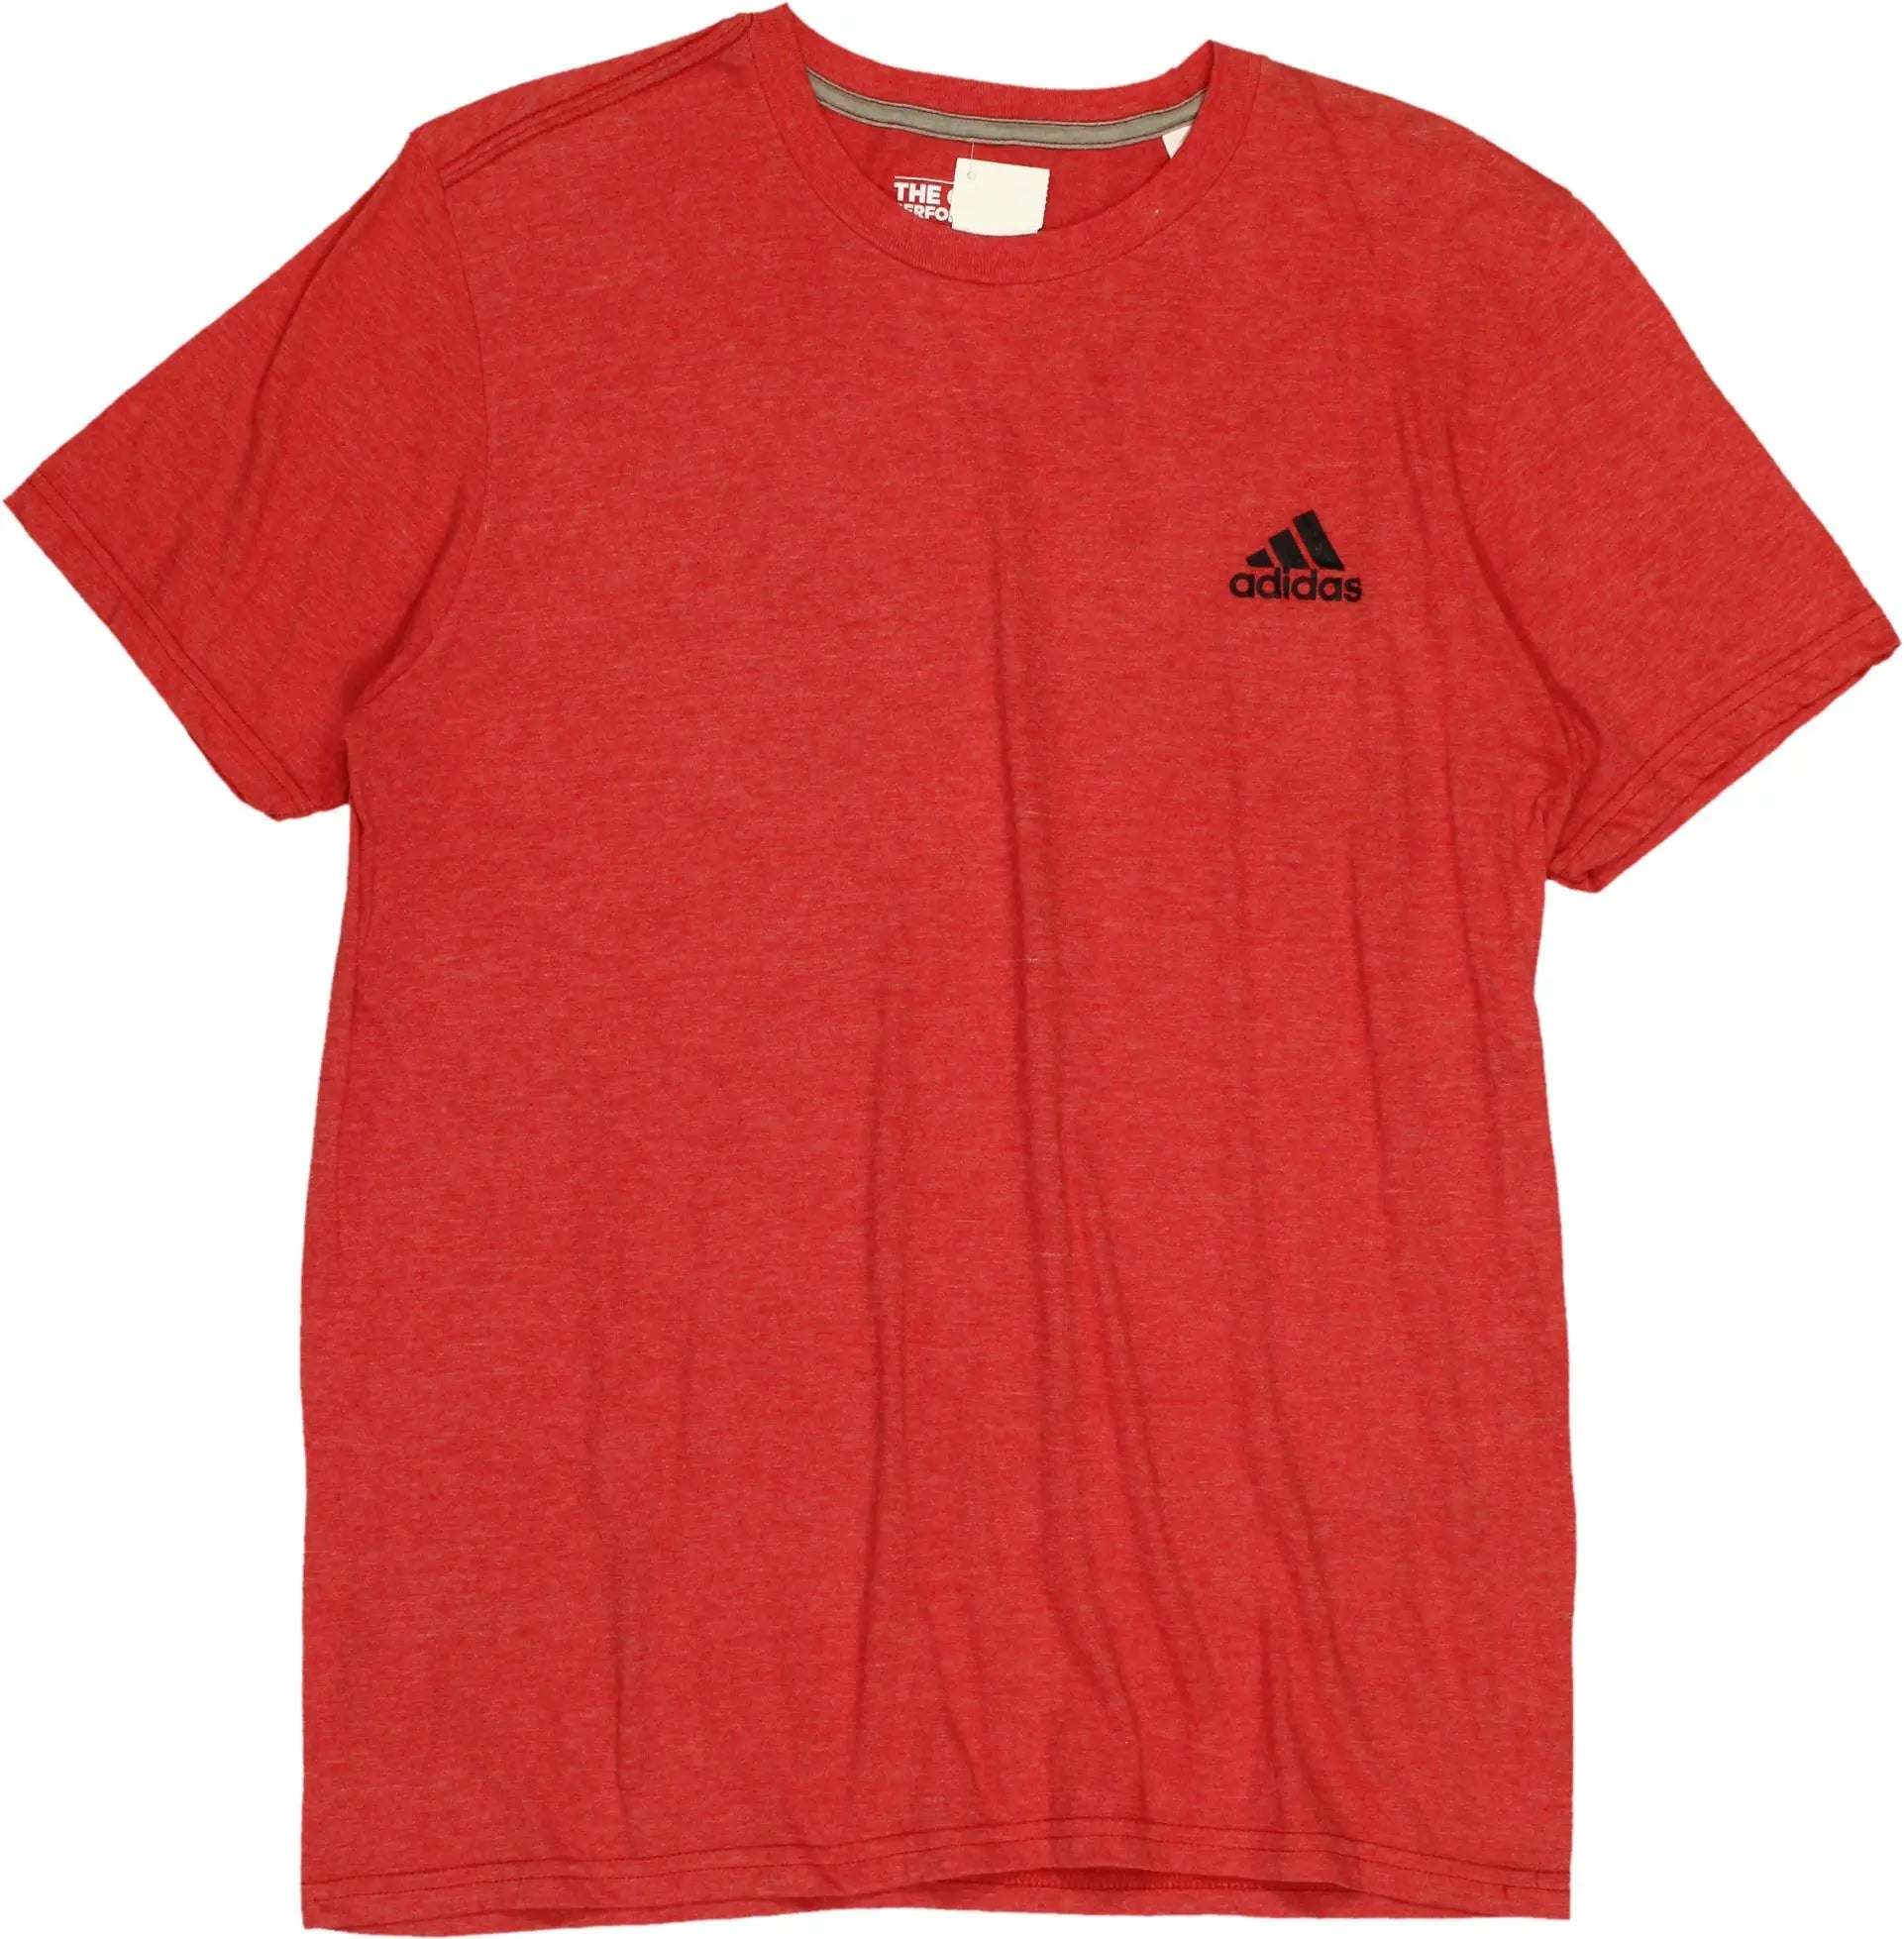 Adidas - Sport T-shirt- ThriftTale.com - Vintage and second handclothing